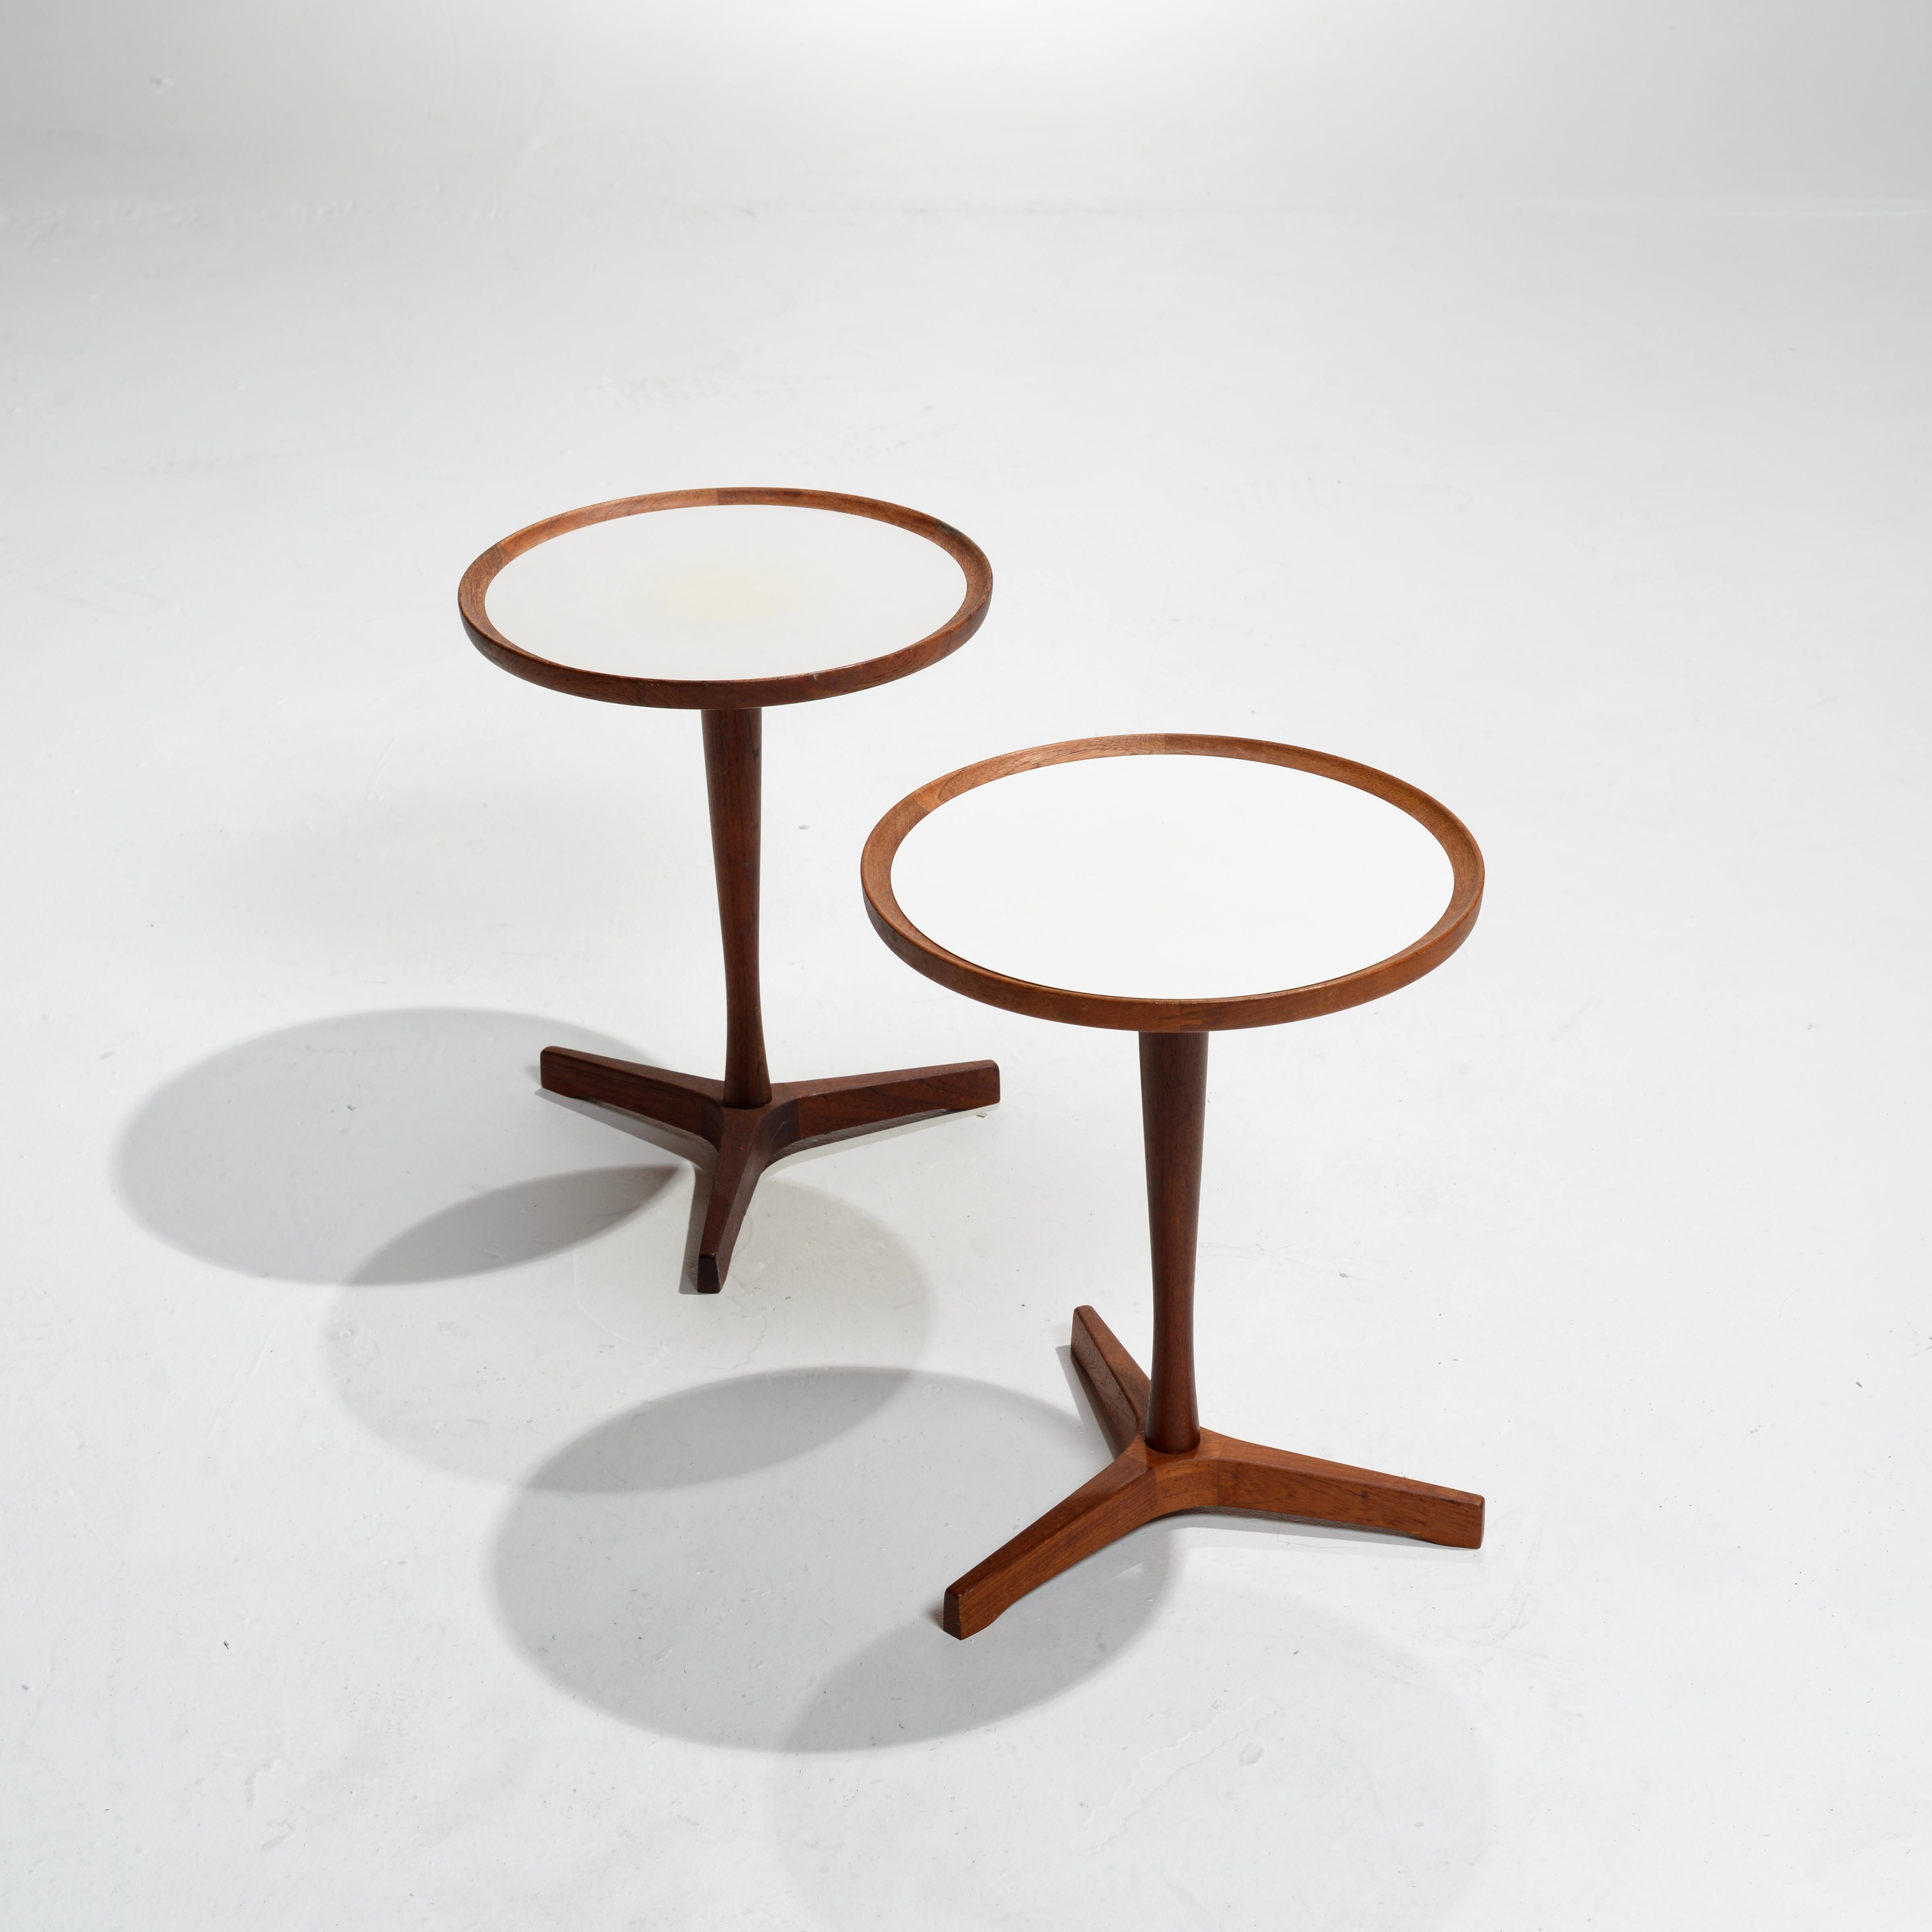 Rare Teak End Tables by Hans C. Andersen, 1950s For Sale 3